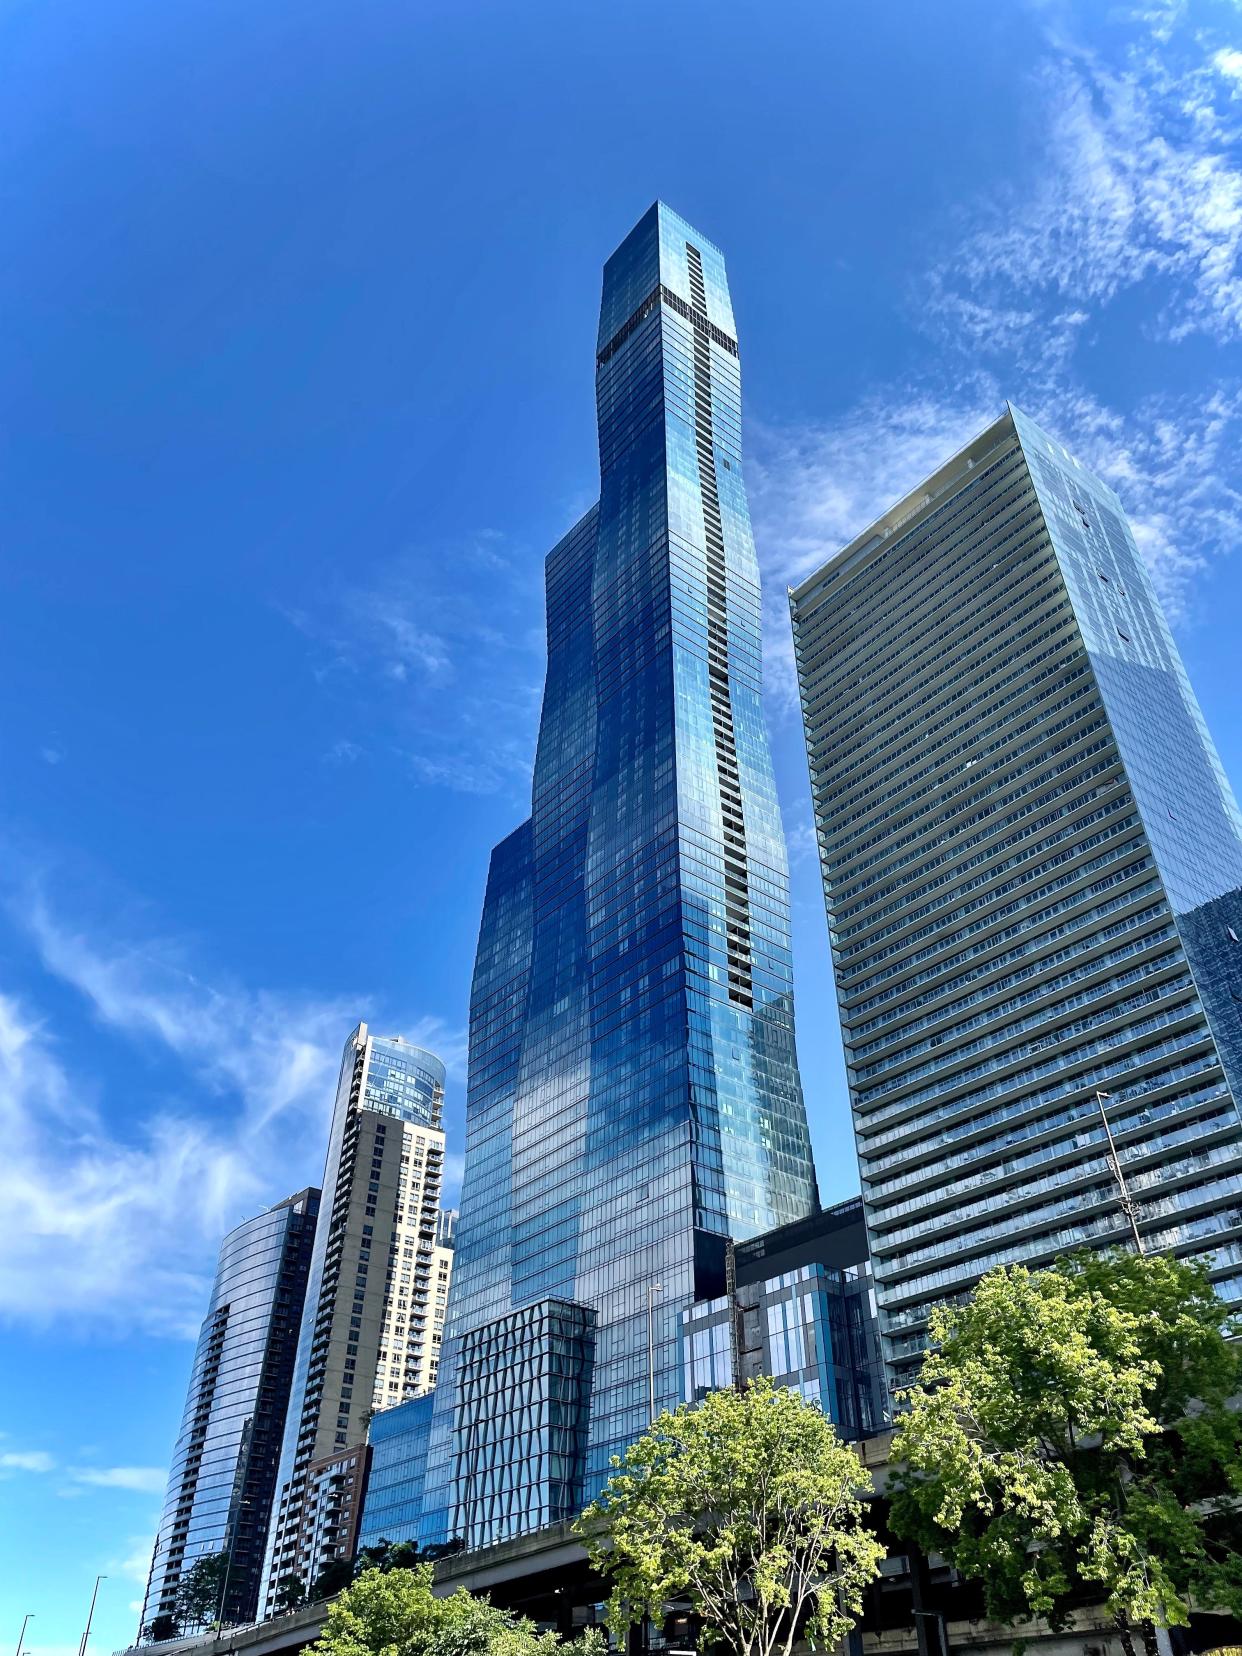 The St. Regis Hotel and Residences tower has redefined the Chicago skyline.